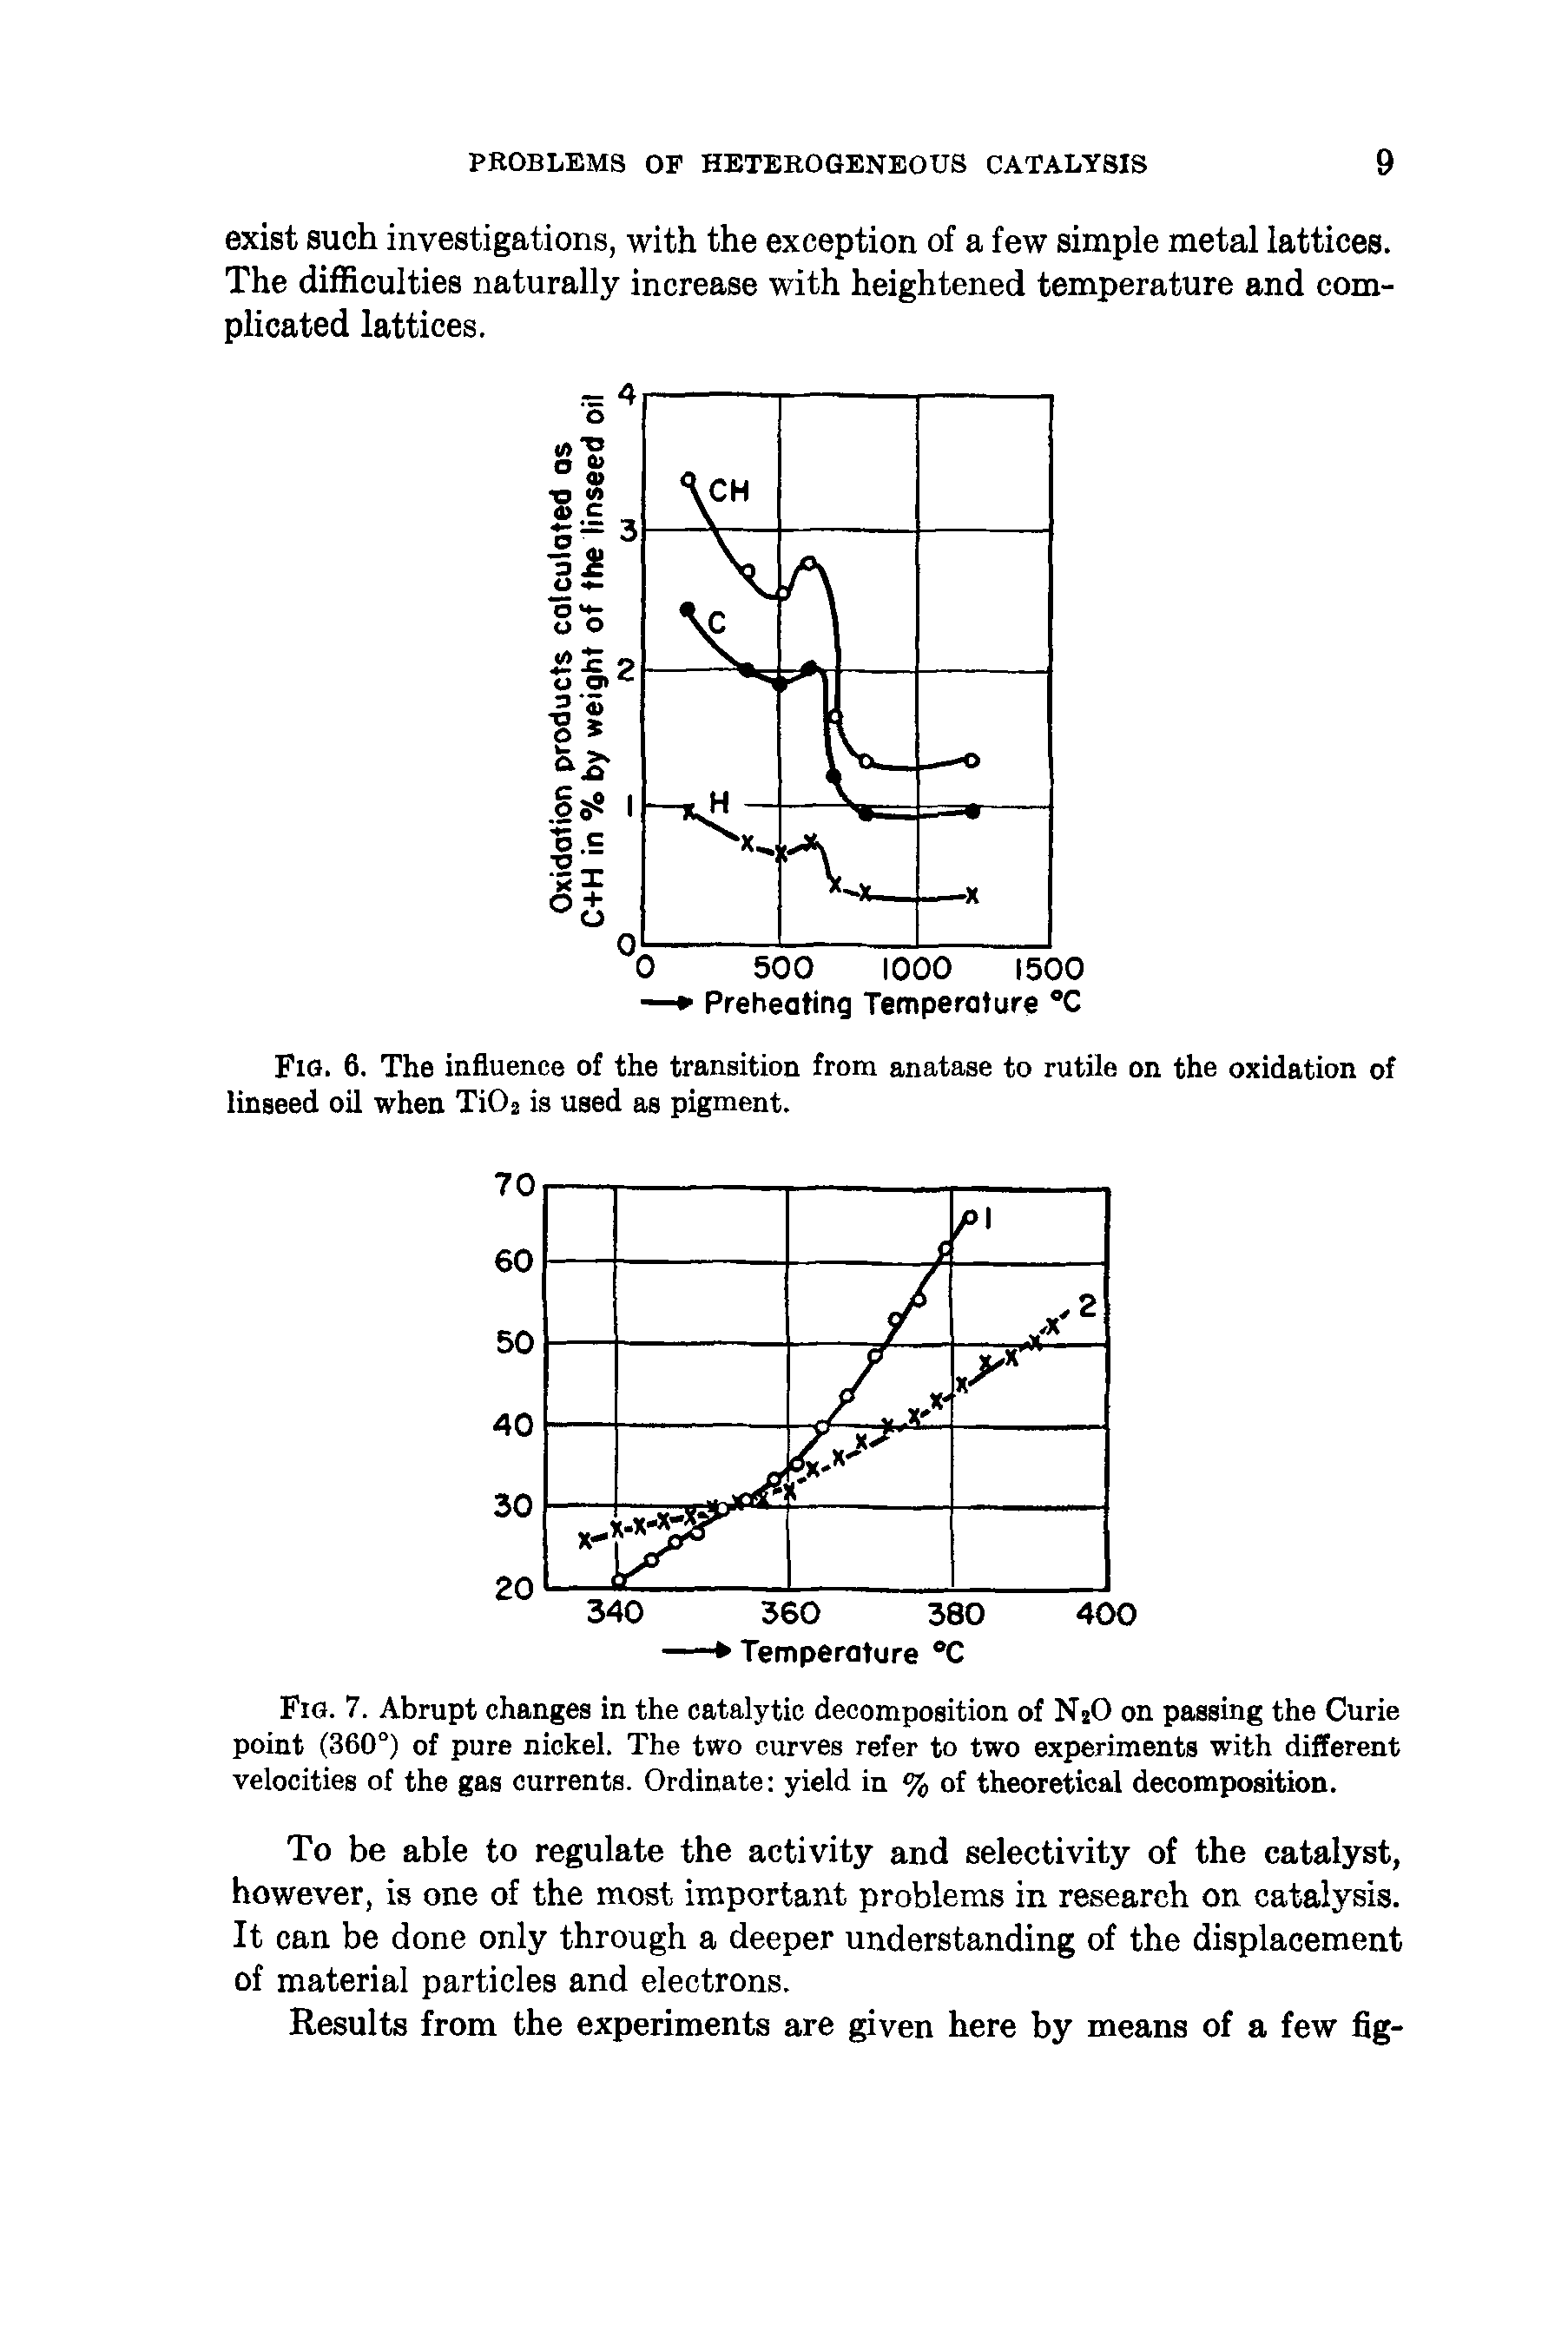 Fig. 7. Abrupt changes in the catalytic decomposition of NjO on passing the Curie point (360°) of pure nickel. The two curves refer to two experiments with different velocities of the gas currents. Ordinate yield in % of theoretical decomposition.